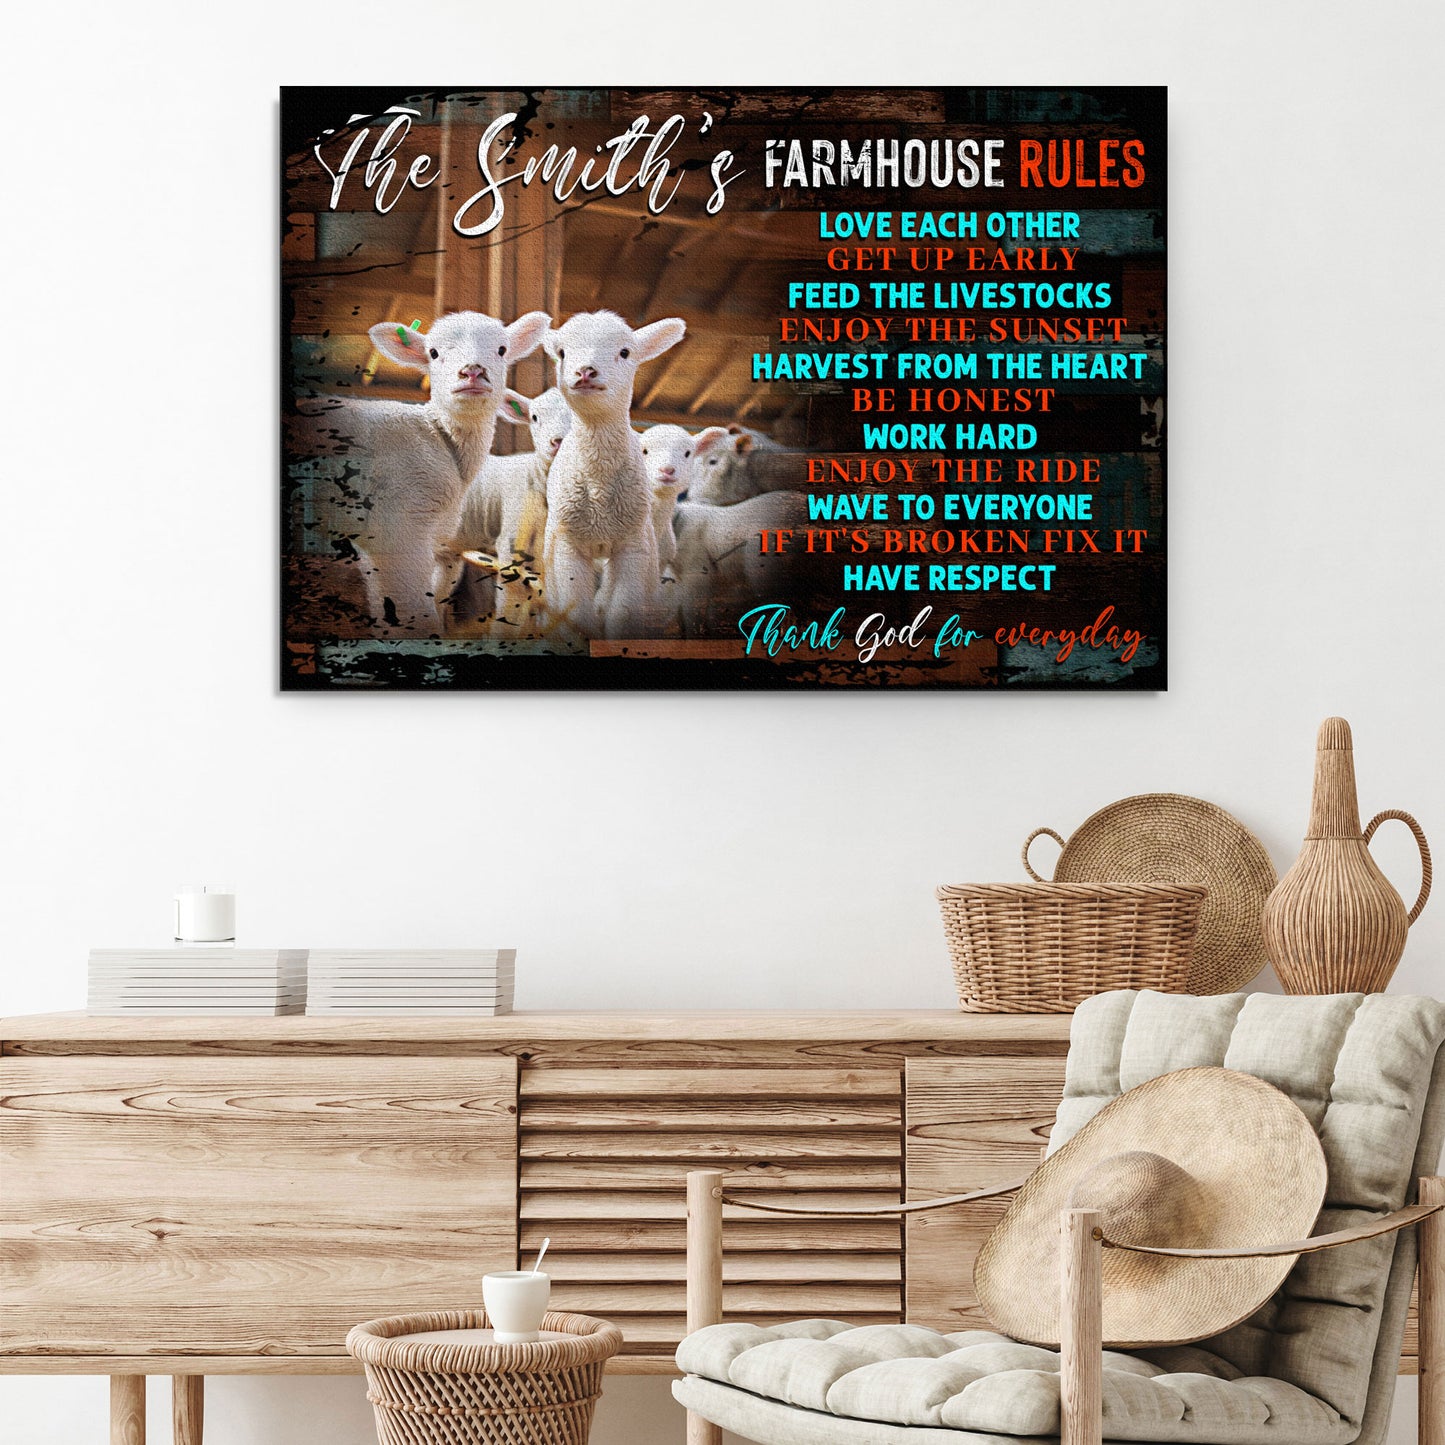 Family Farmhouse Rules Sign - Image by Tailored Canvases